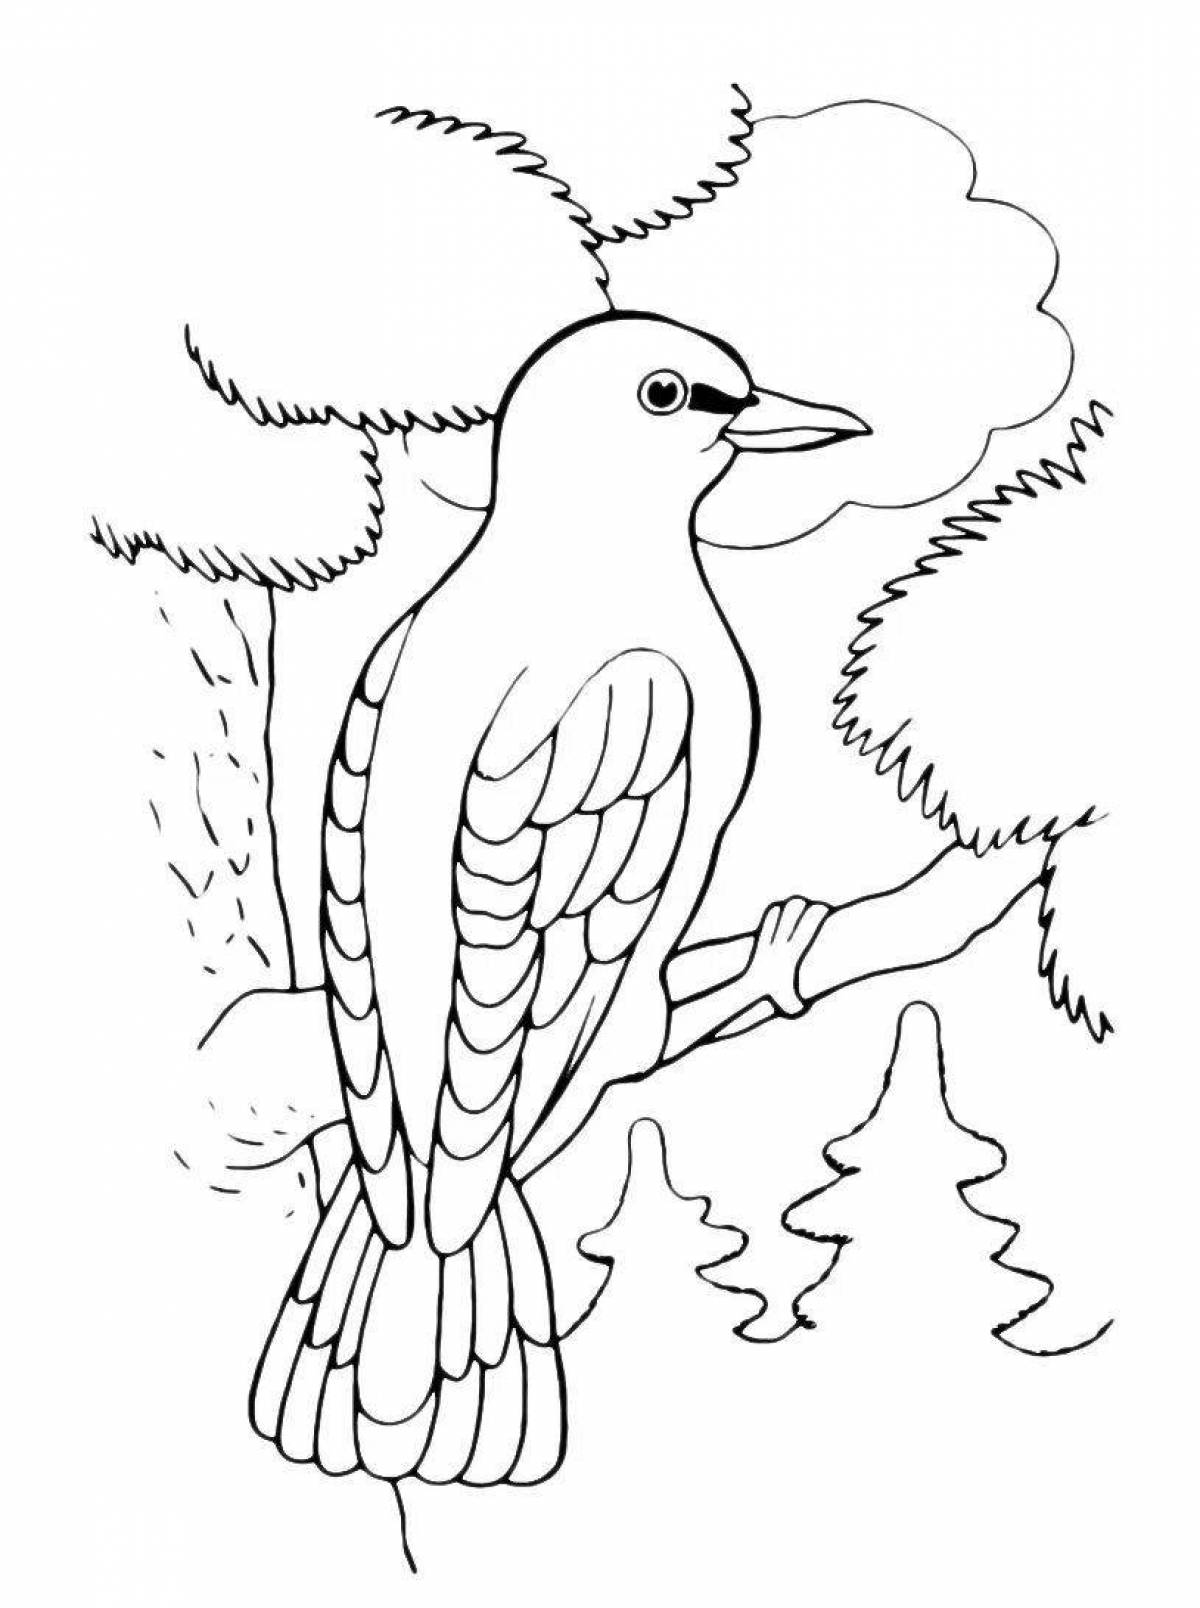 Coloring book energetic woodpecker for children 6-7 years old